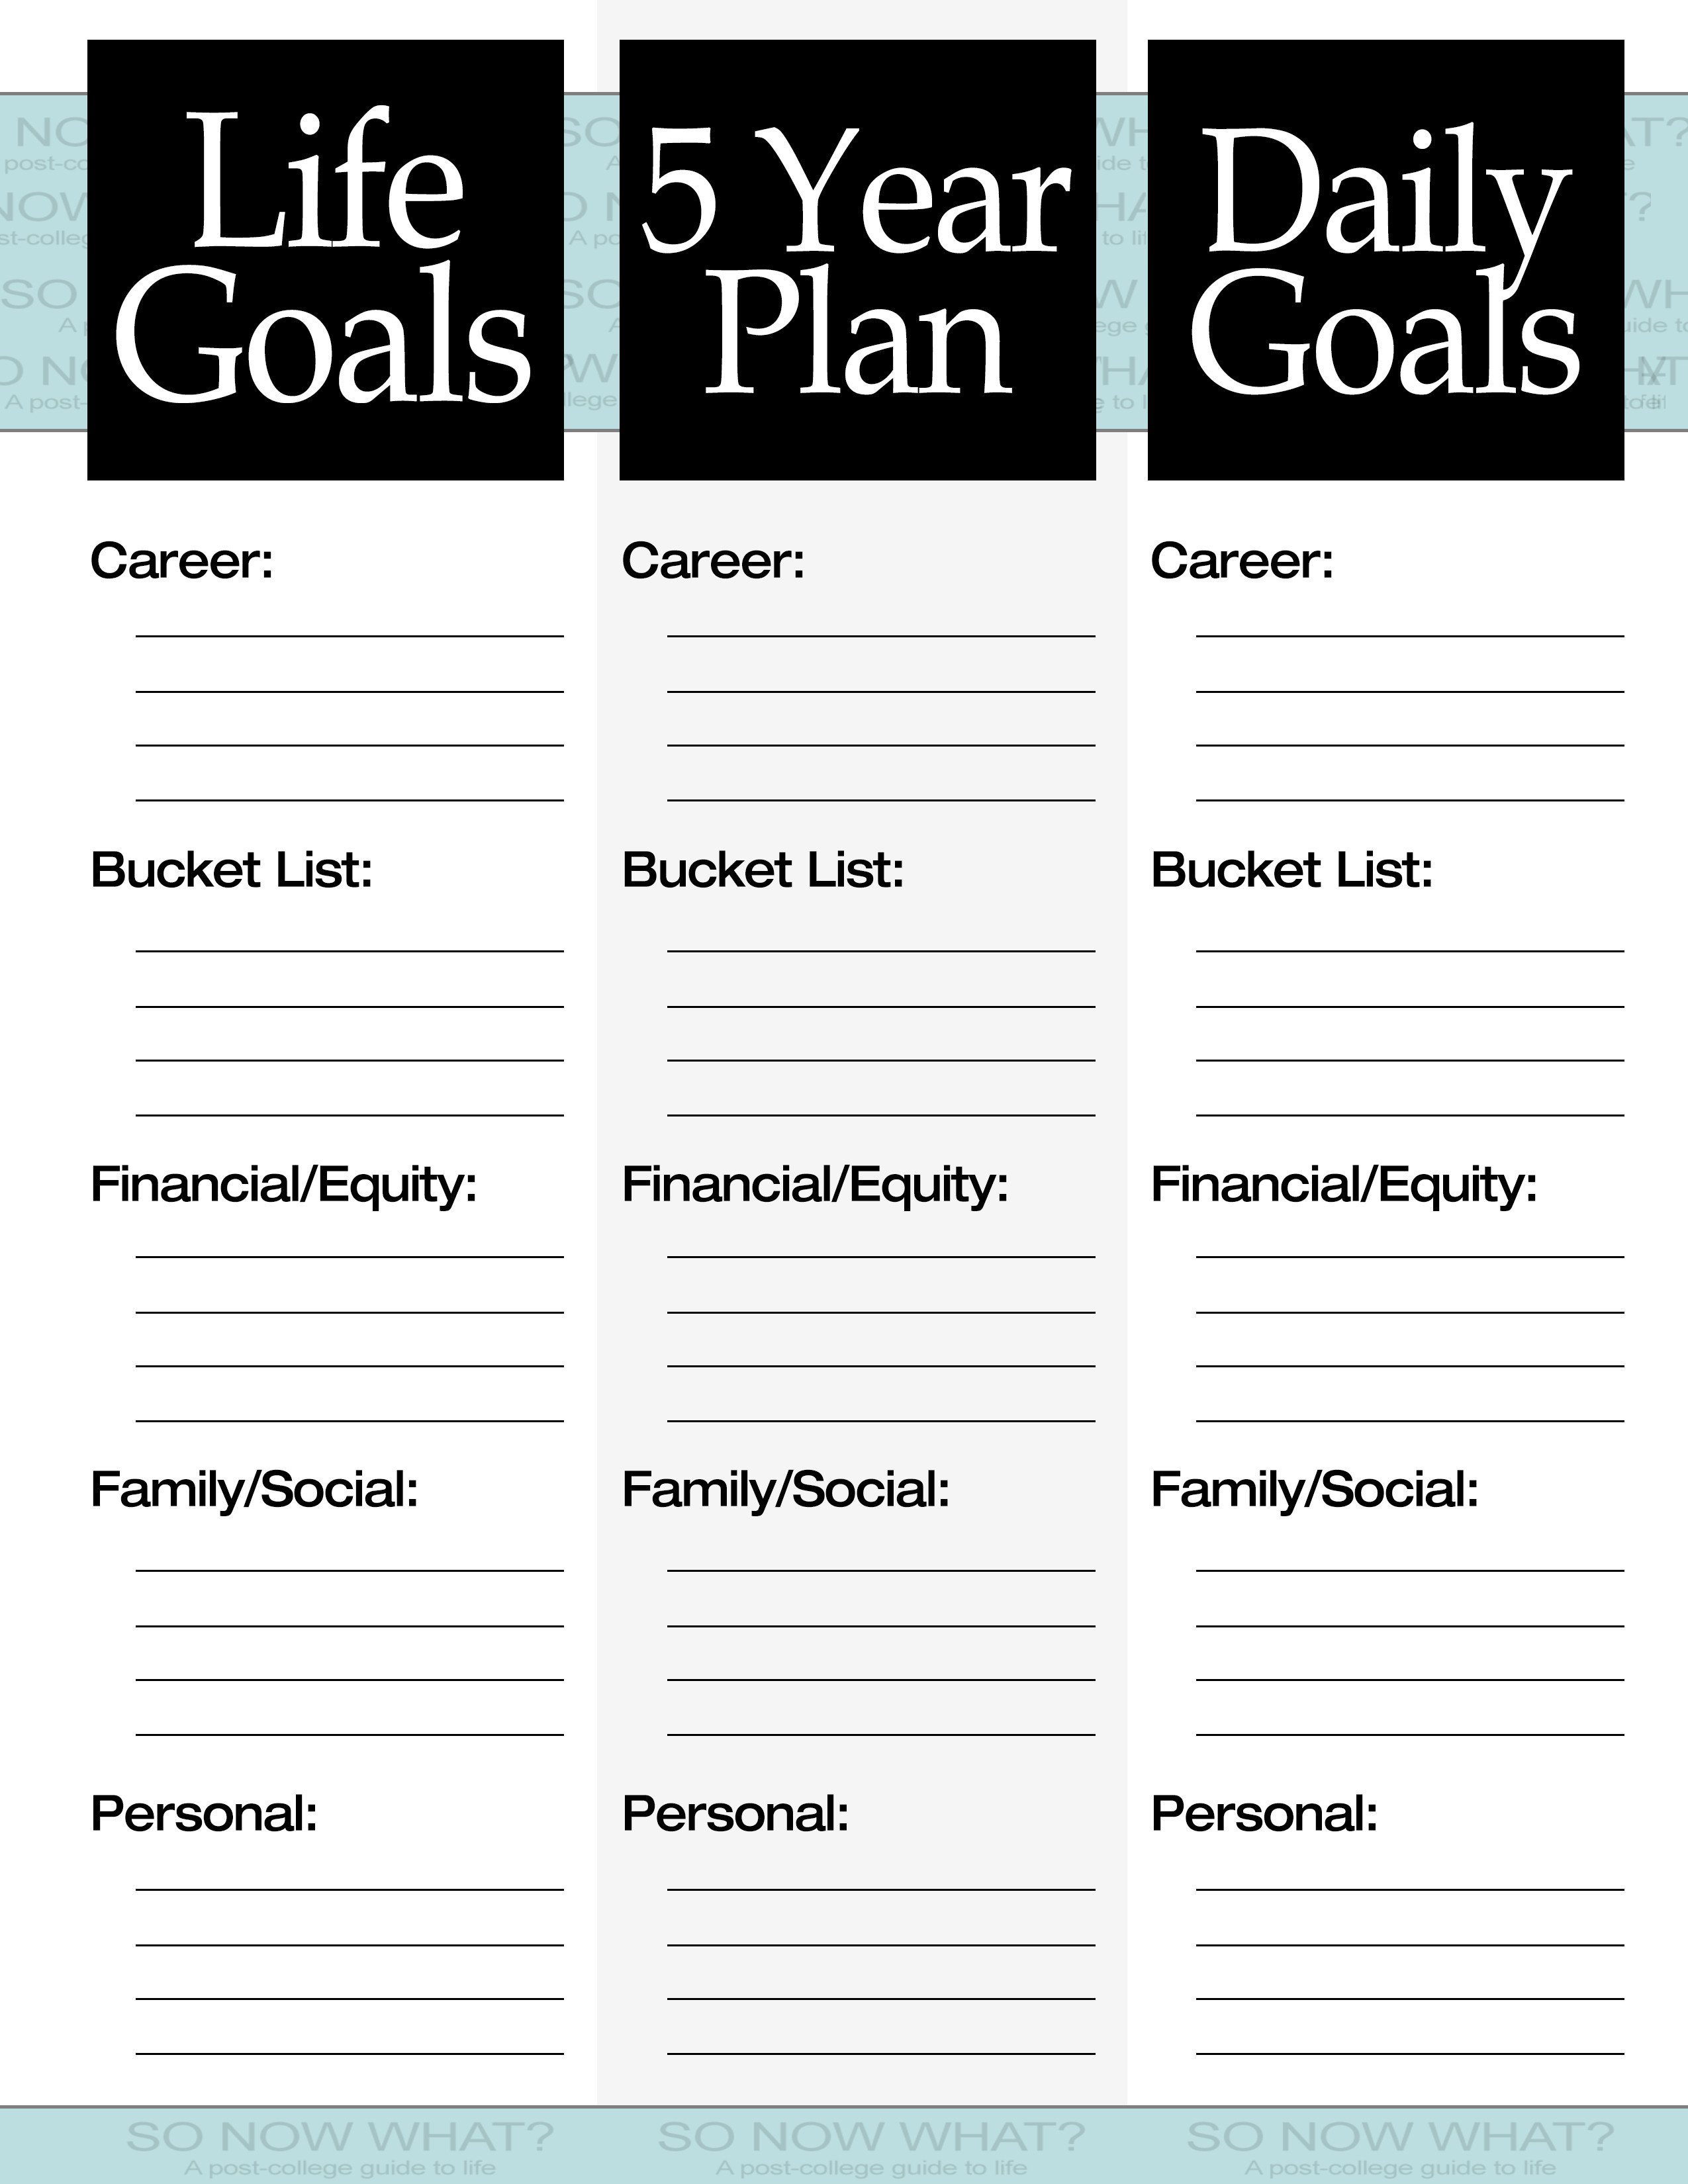 Five Year Plan Template the 3 Steps to A 5 Year Plan